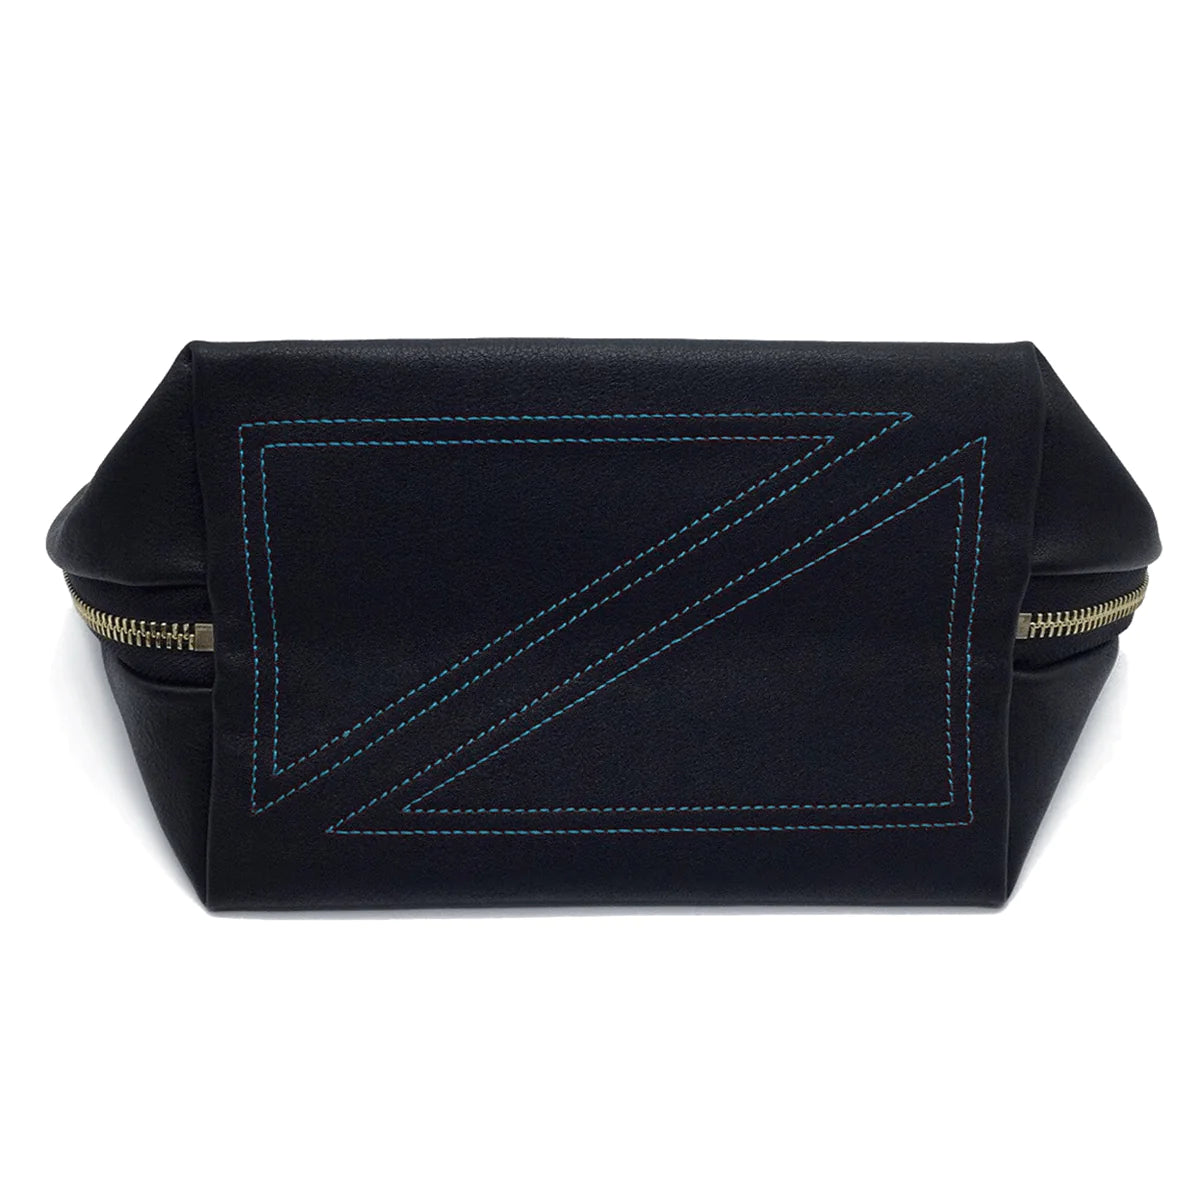 KUSSHI Vacationer Makeup Bag Black Fabric with Teal Interior